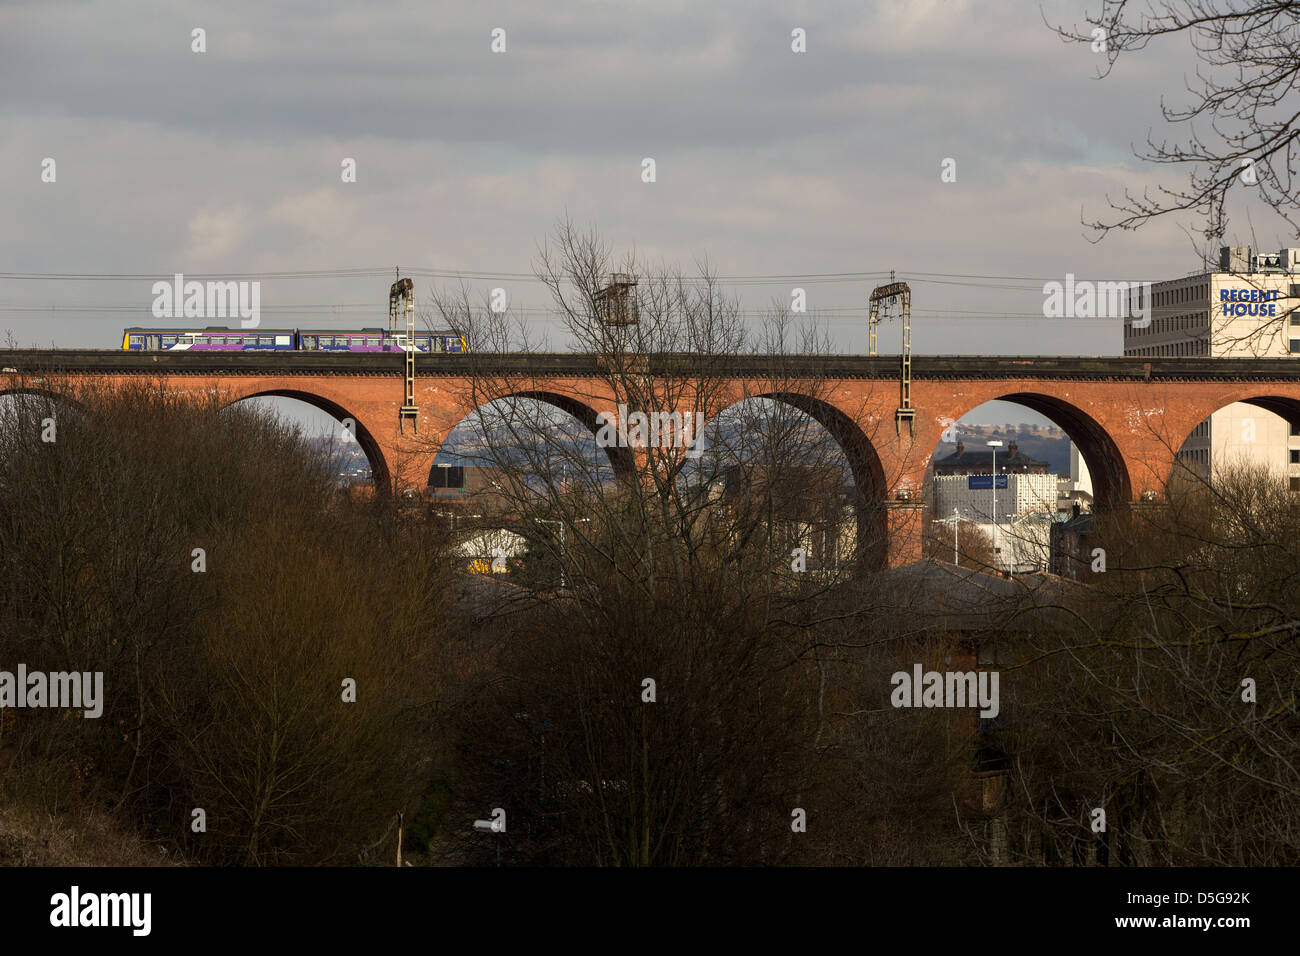 The Stockport Viaduct . The bridge carries the railway over the River Mersey in Stockport , Greater Manchester Stock Photo